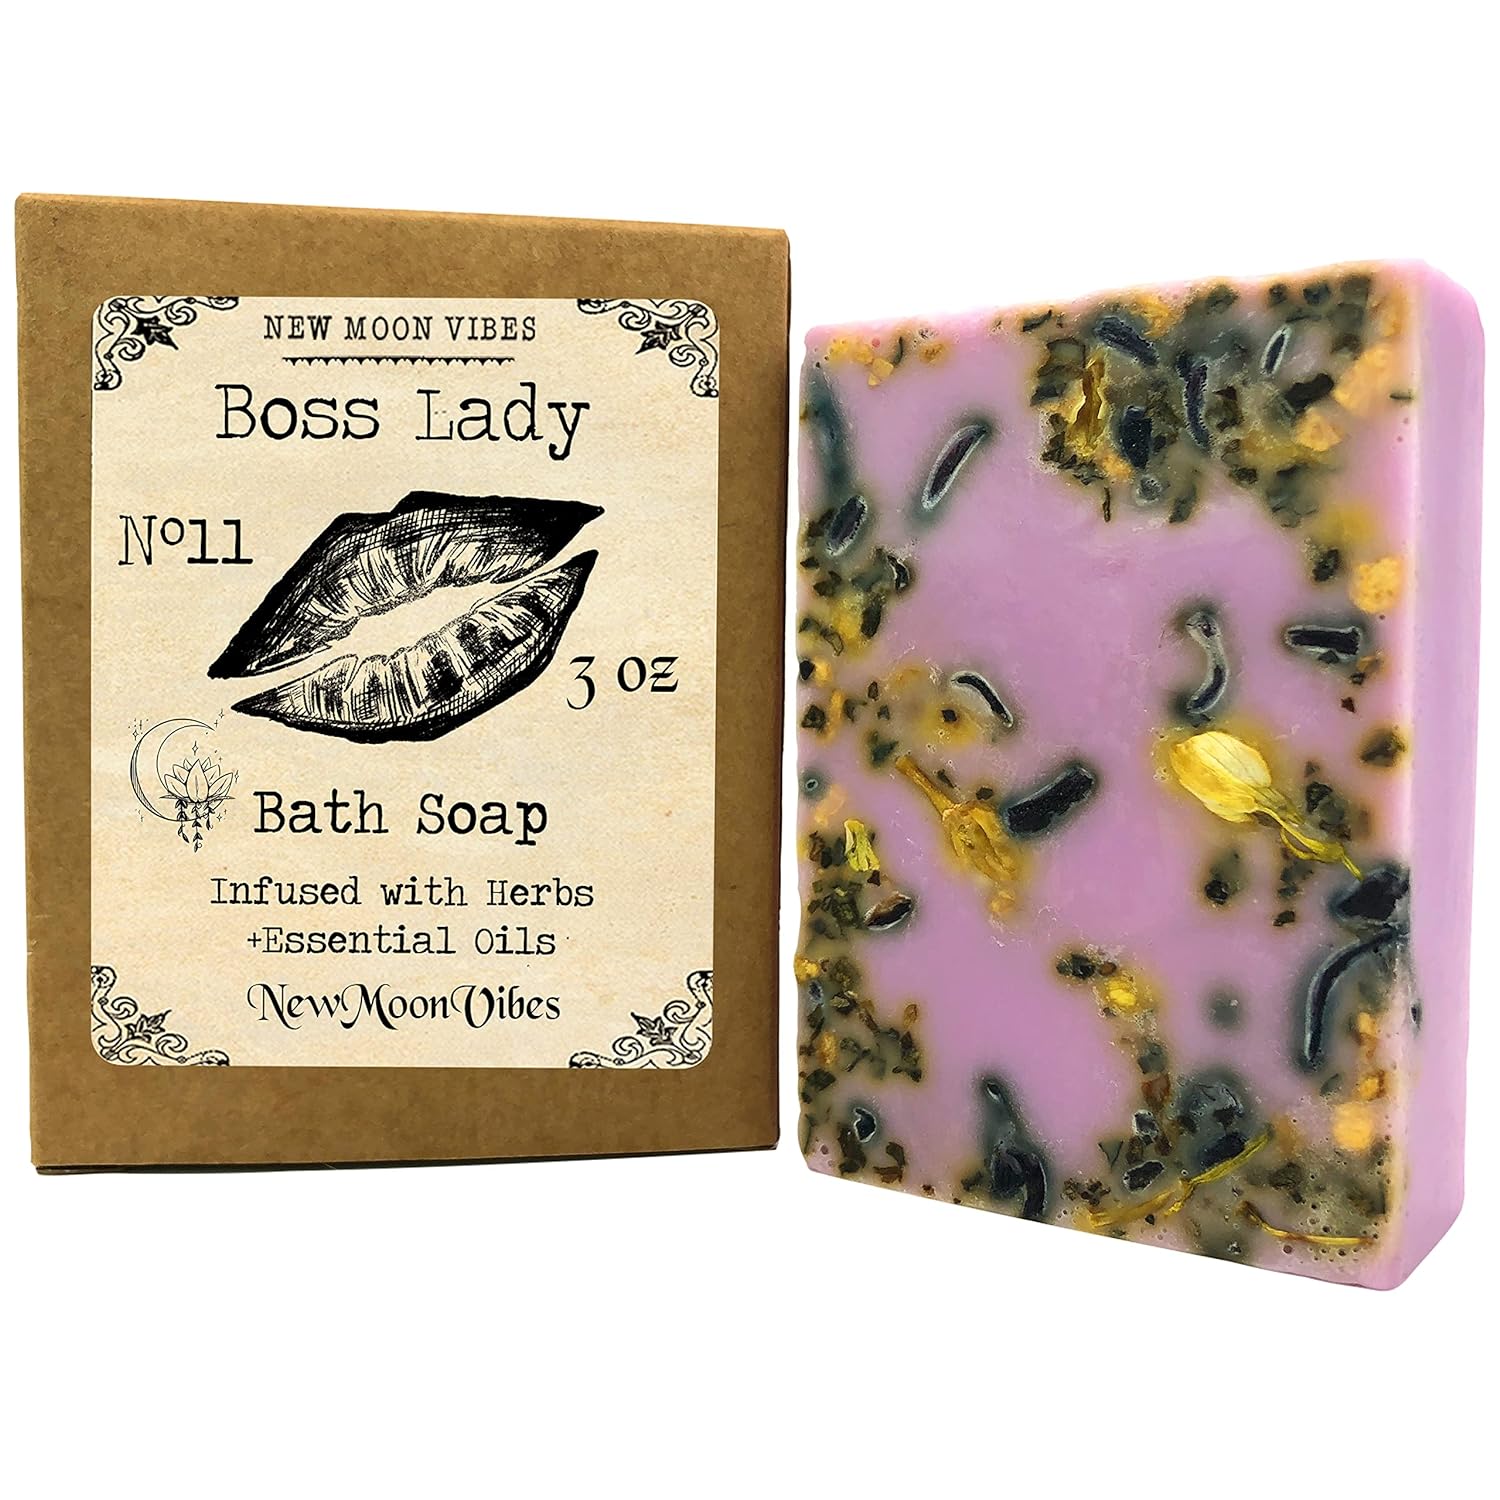 Boss Lady Essential Oil Herbal Ritual Bath Soap Bar Infused with Real Herbs Botanicals Scented Beauty Love Power Control Women Success Confidence Attain Dreams Goals Self Love Acceptance Draw New Luck